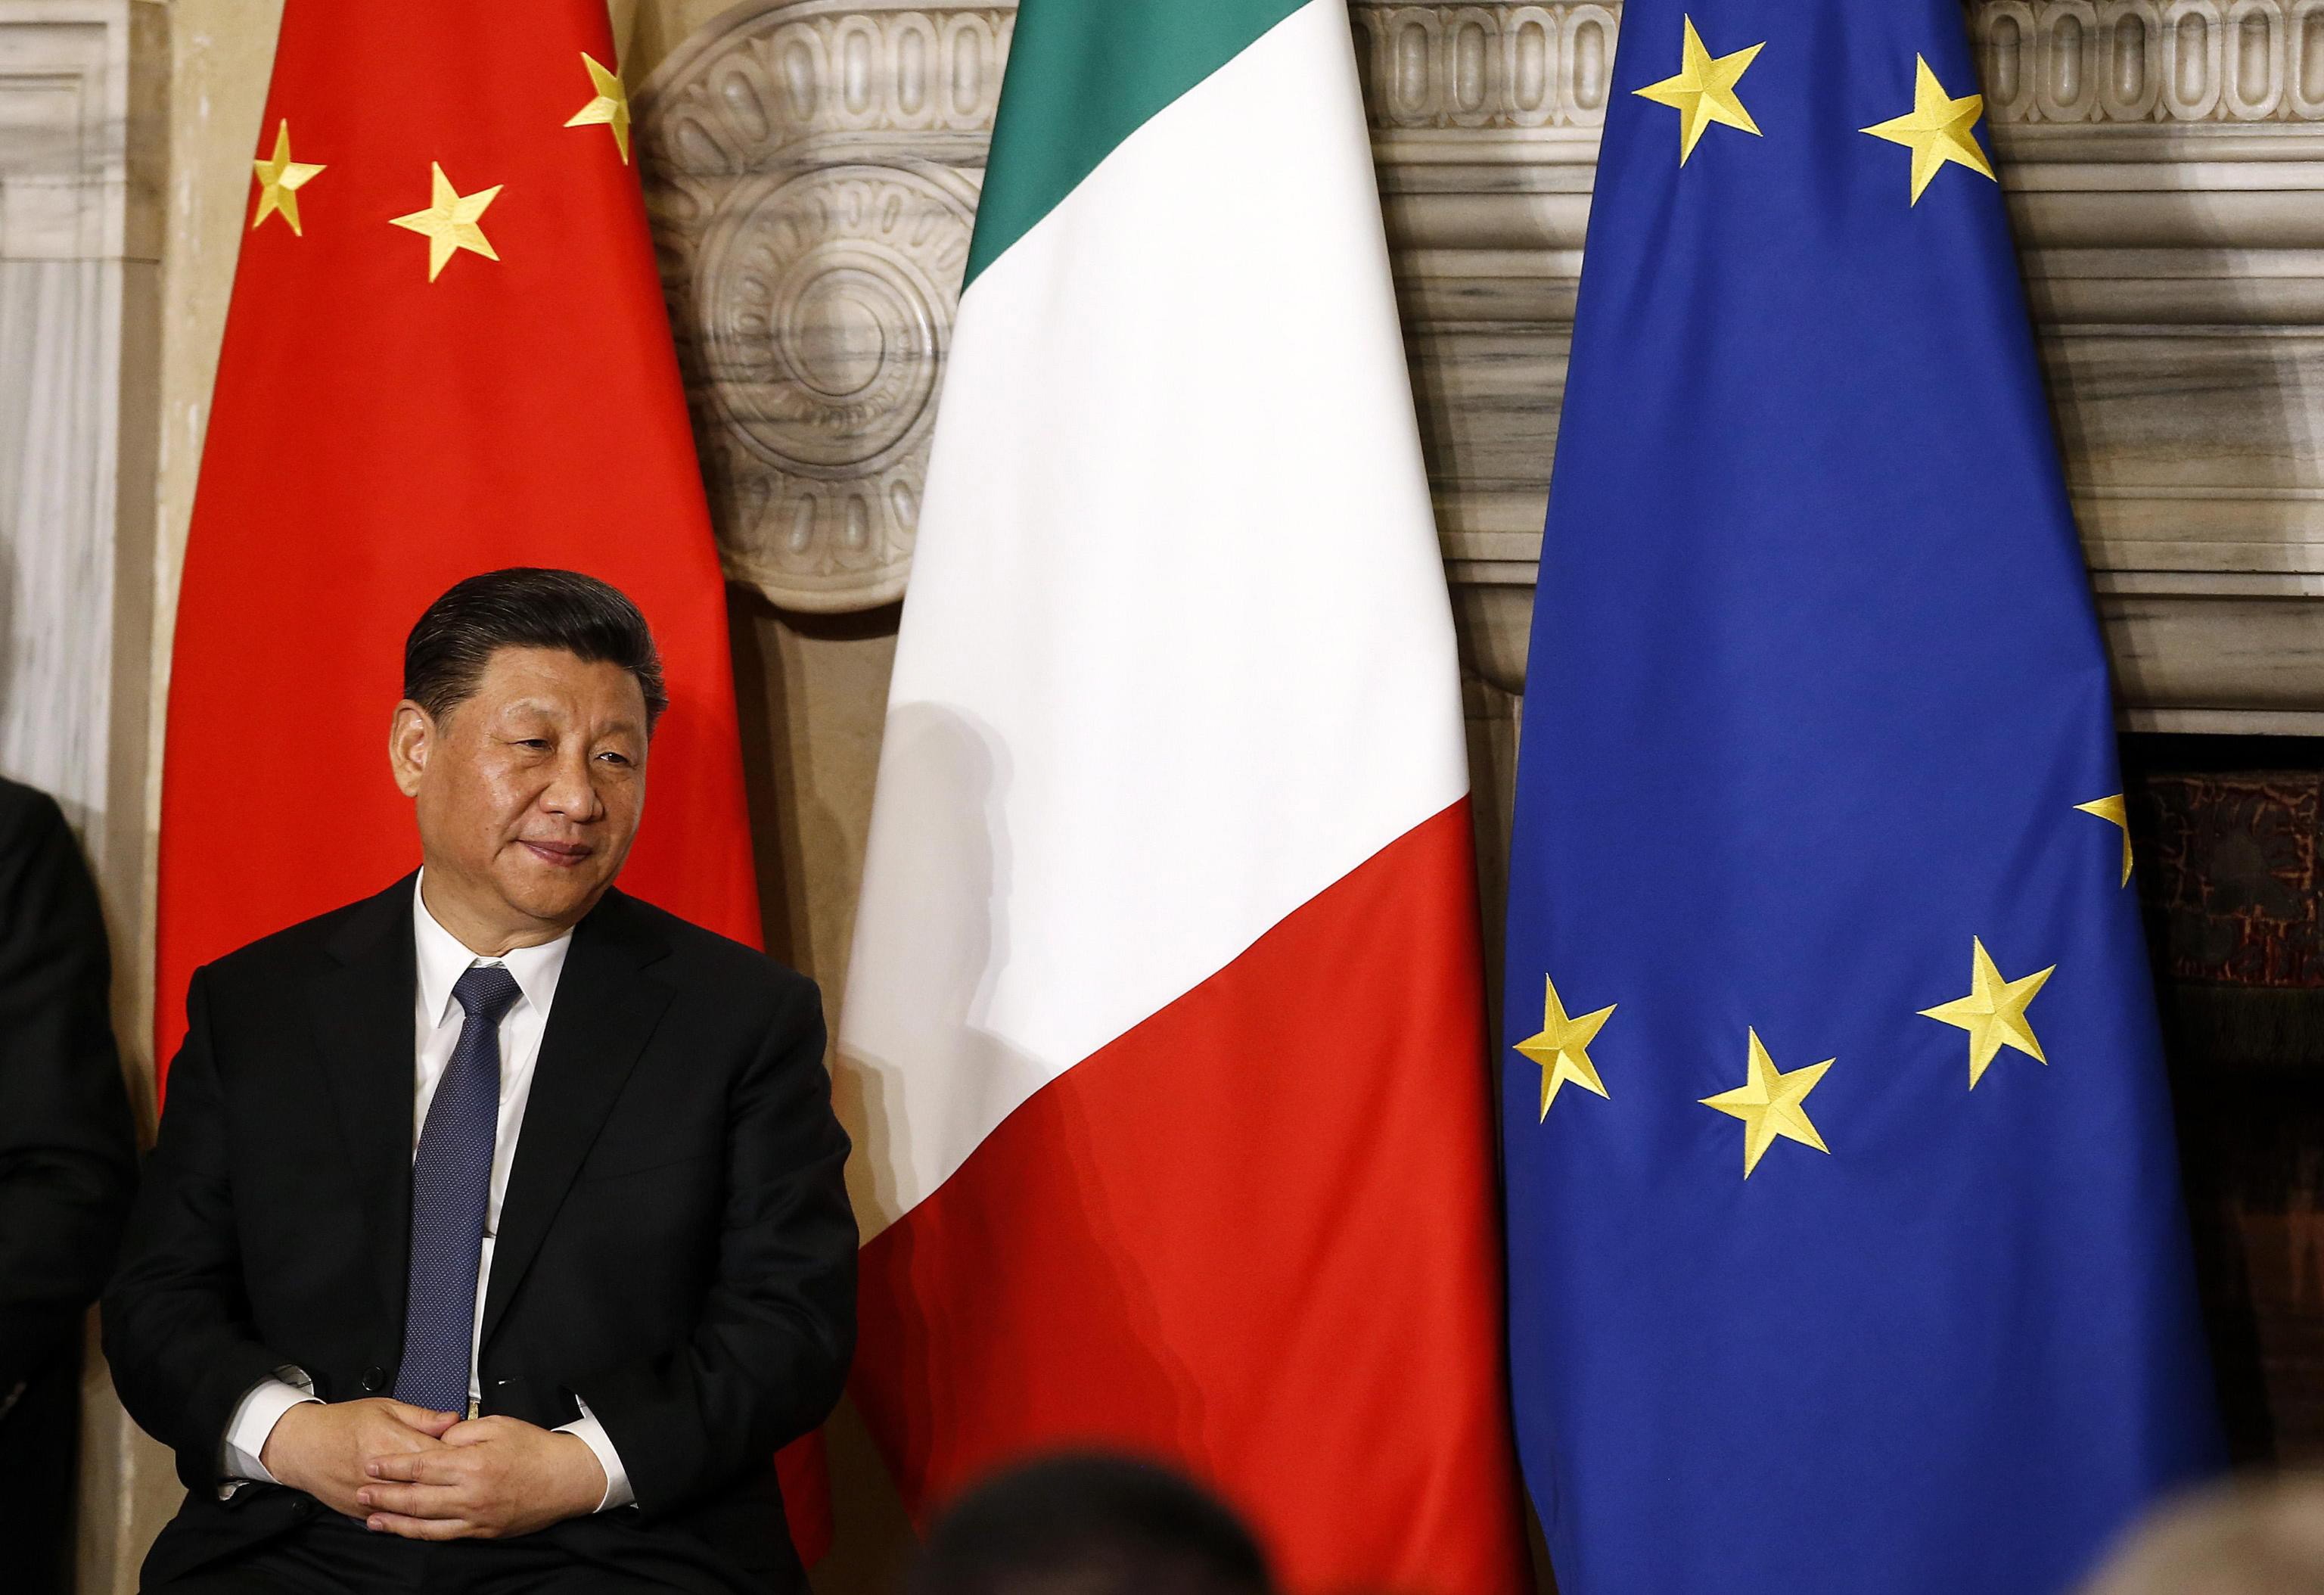 Chinese President Xi Jinping is seen ahead of the signing of a memorandum of understanding making Italy part of the “Belt and Road Initiative” in Rome on March 23. Italy joined the belt and road scheme against Washington’s wishes, and other European powers have declined to follow the US, Australia and Japan’s more stringent measures against Huawei and ZTE. Photo: EPA-EFE